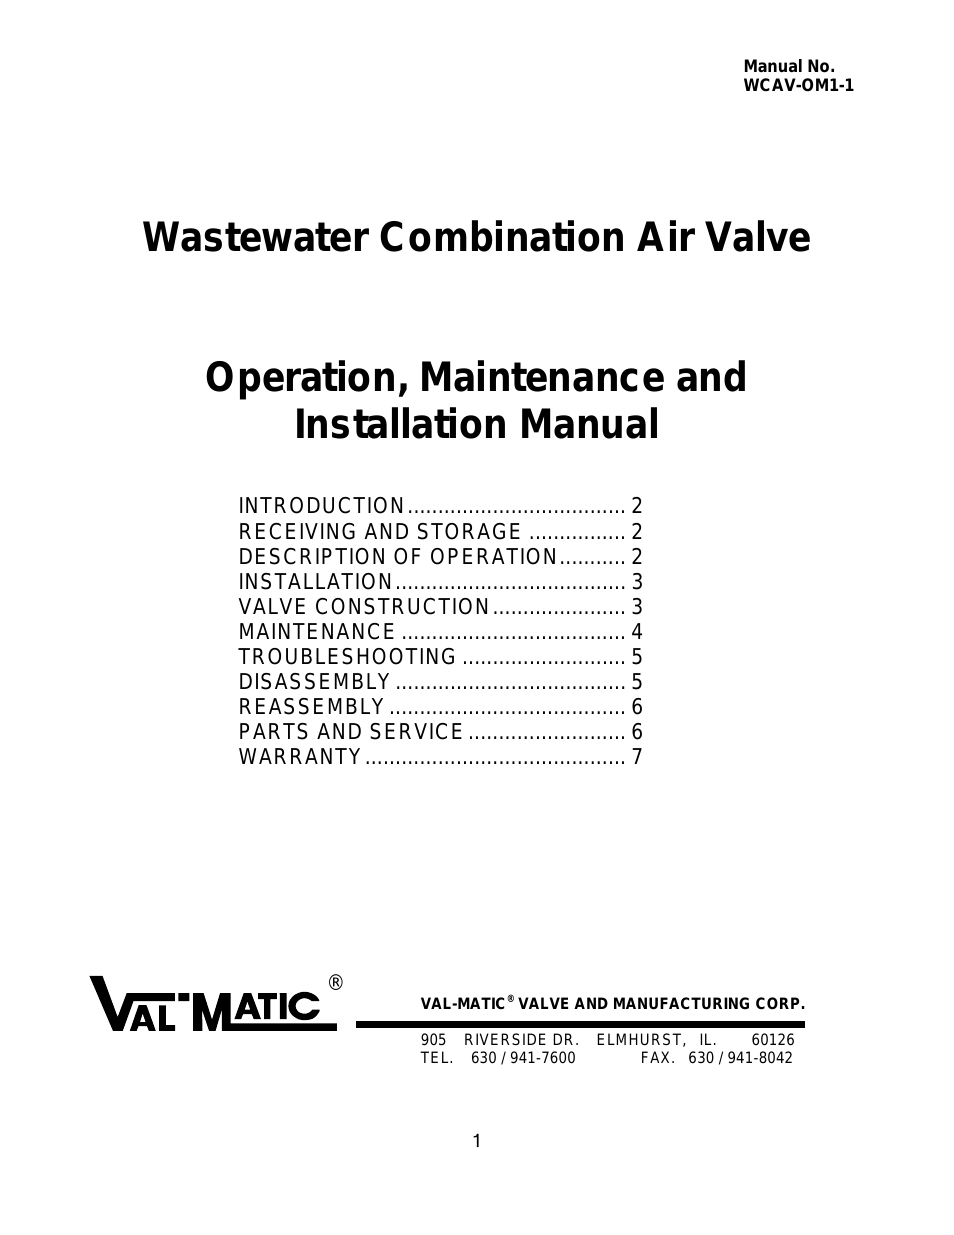 Wastewater Combination Air Valve